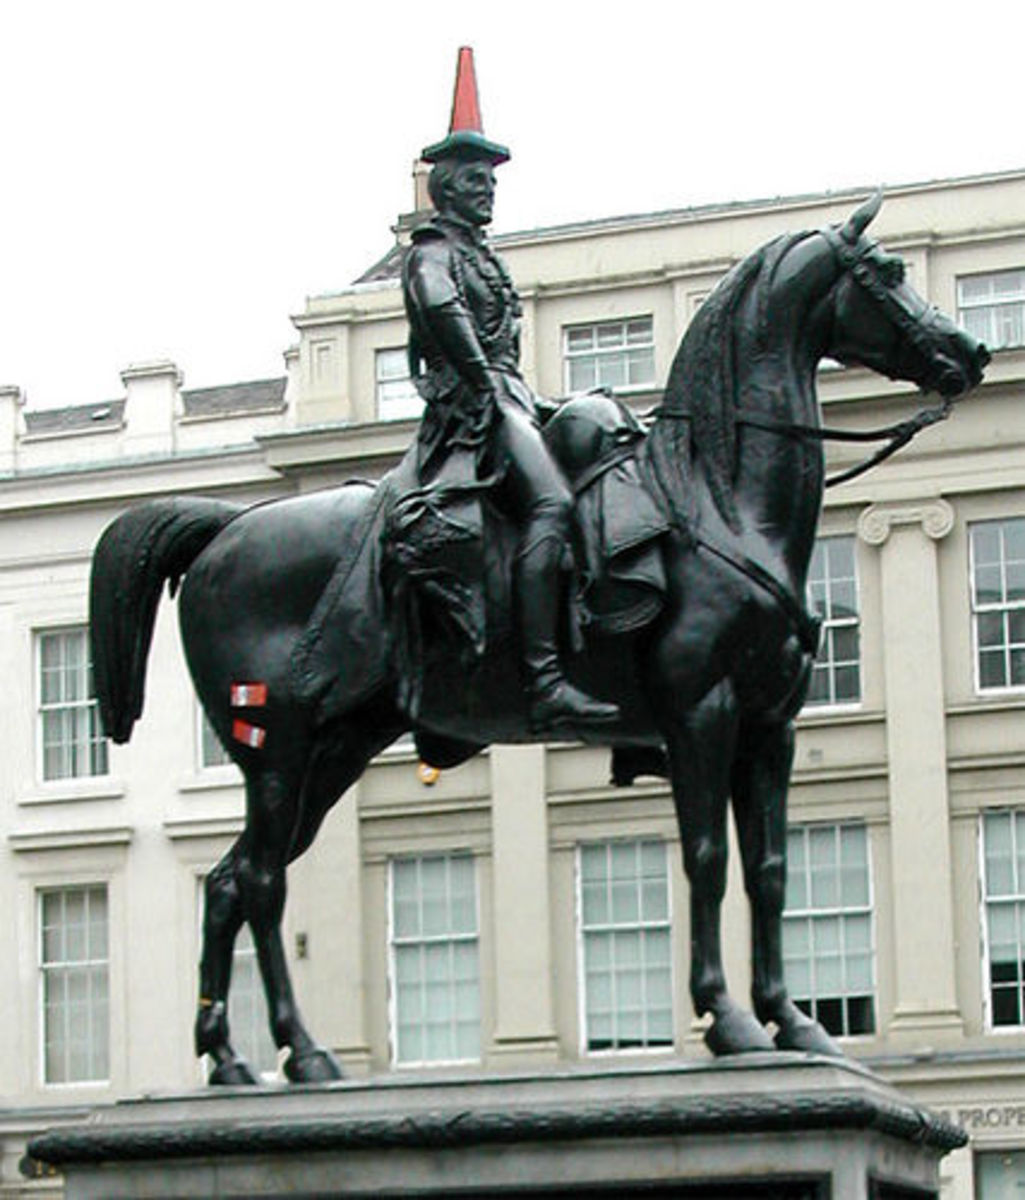 The Duke of Wellington sports the latest High Street fashion. (Photo by Laertes @ Flickr Creative Commons)